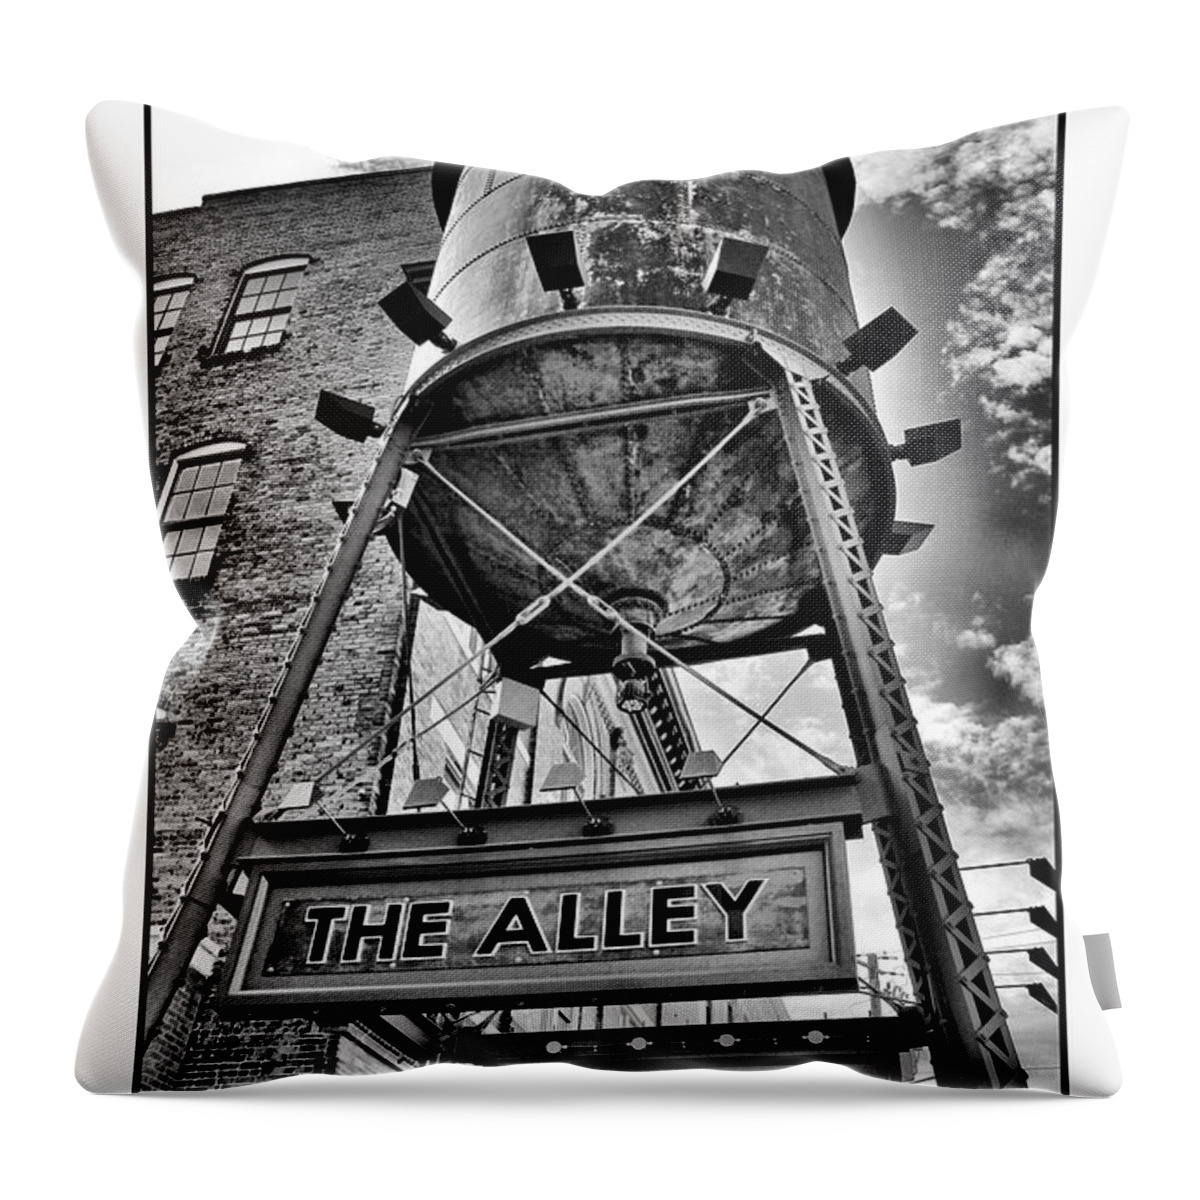 Montgomery Throw Pillow featuring the digital art The Alley by Greg Sharpe